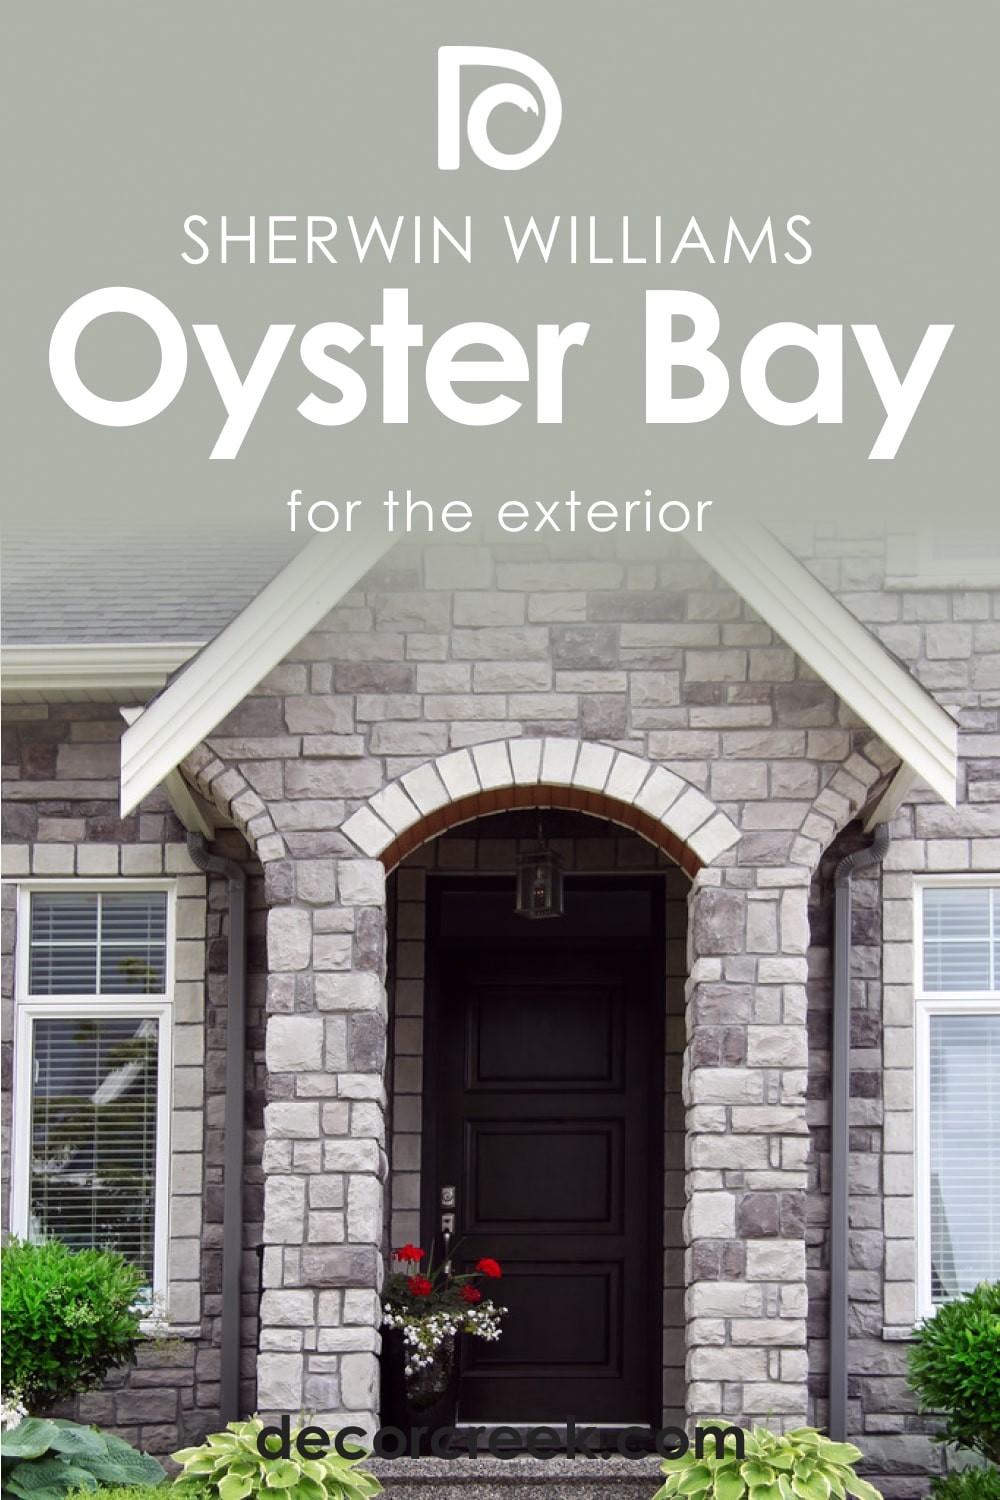 Oyster Bay SW-6206  for the Exterior Use